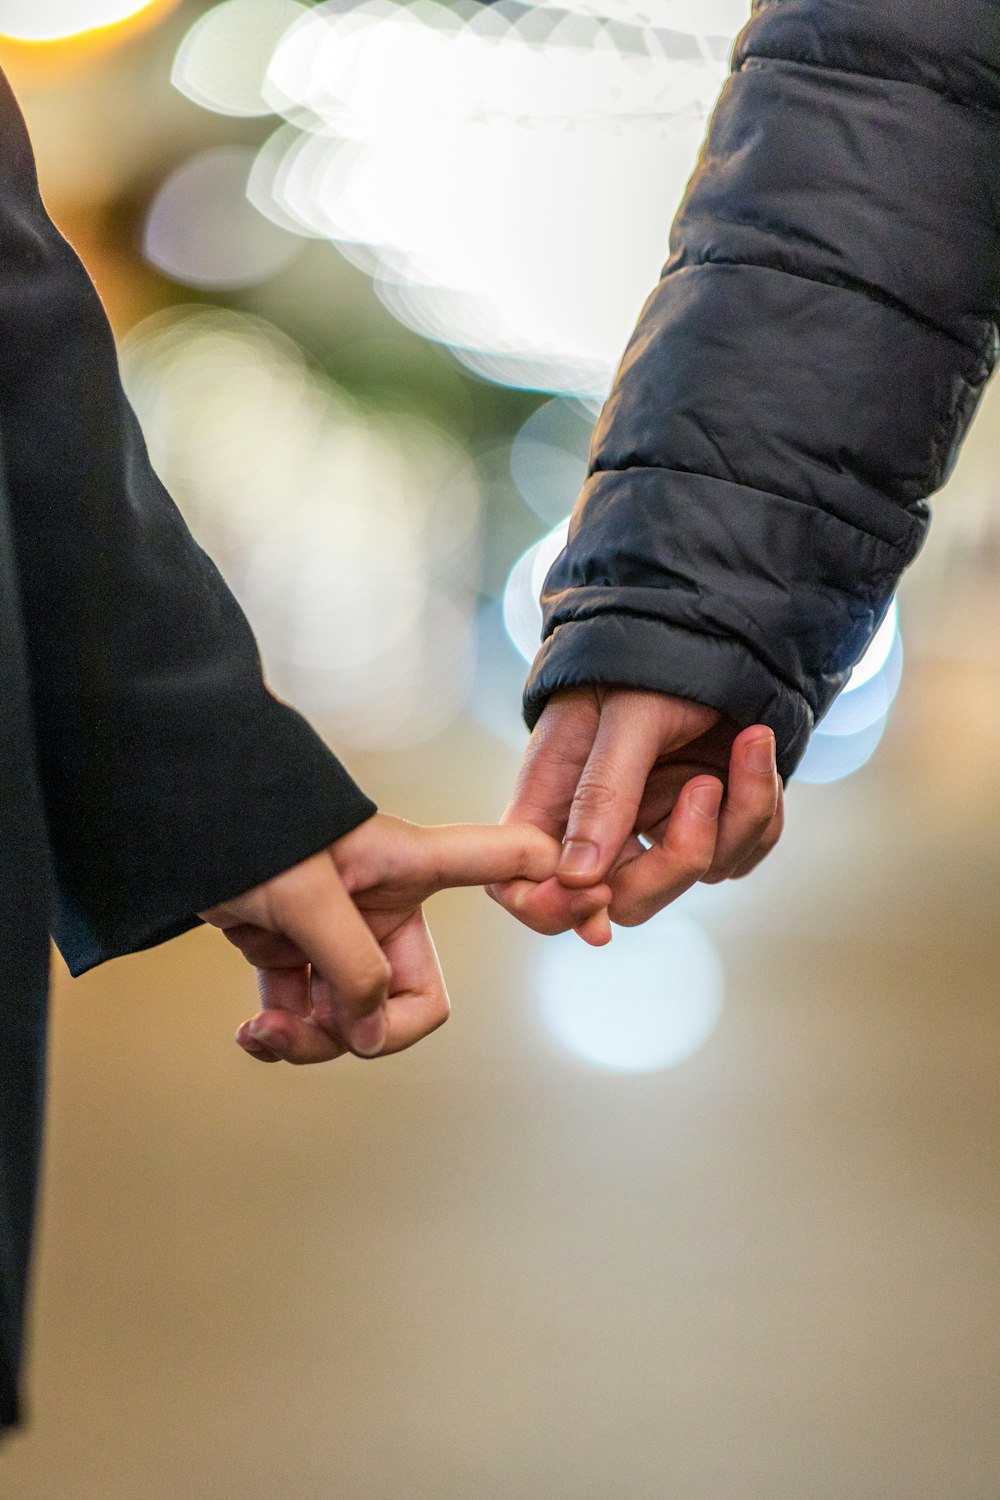 people holding hands photography